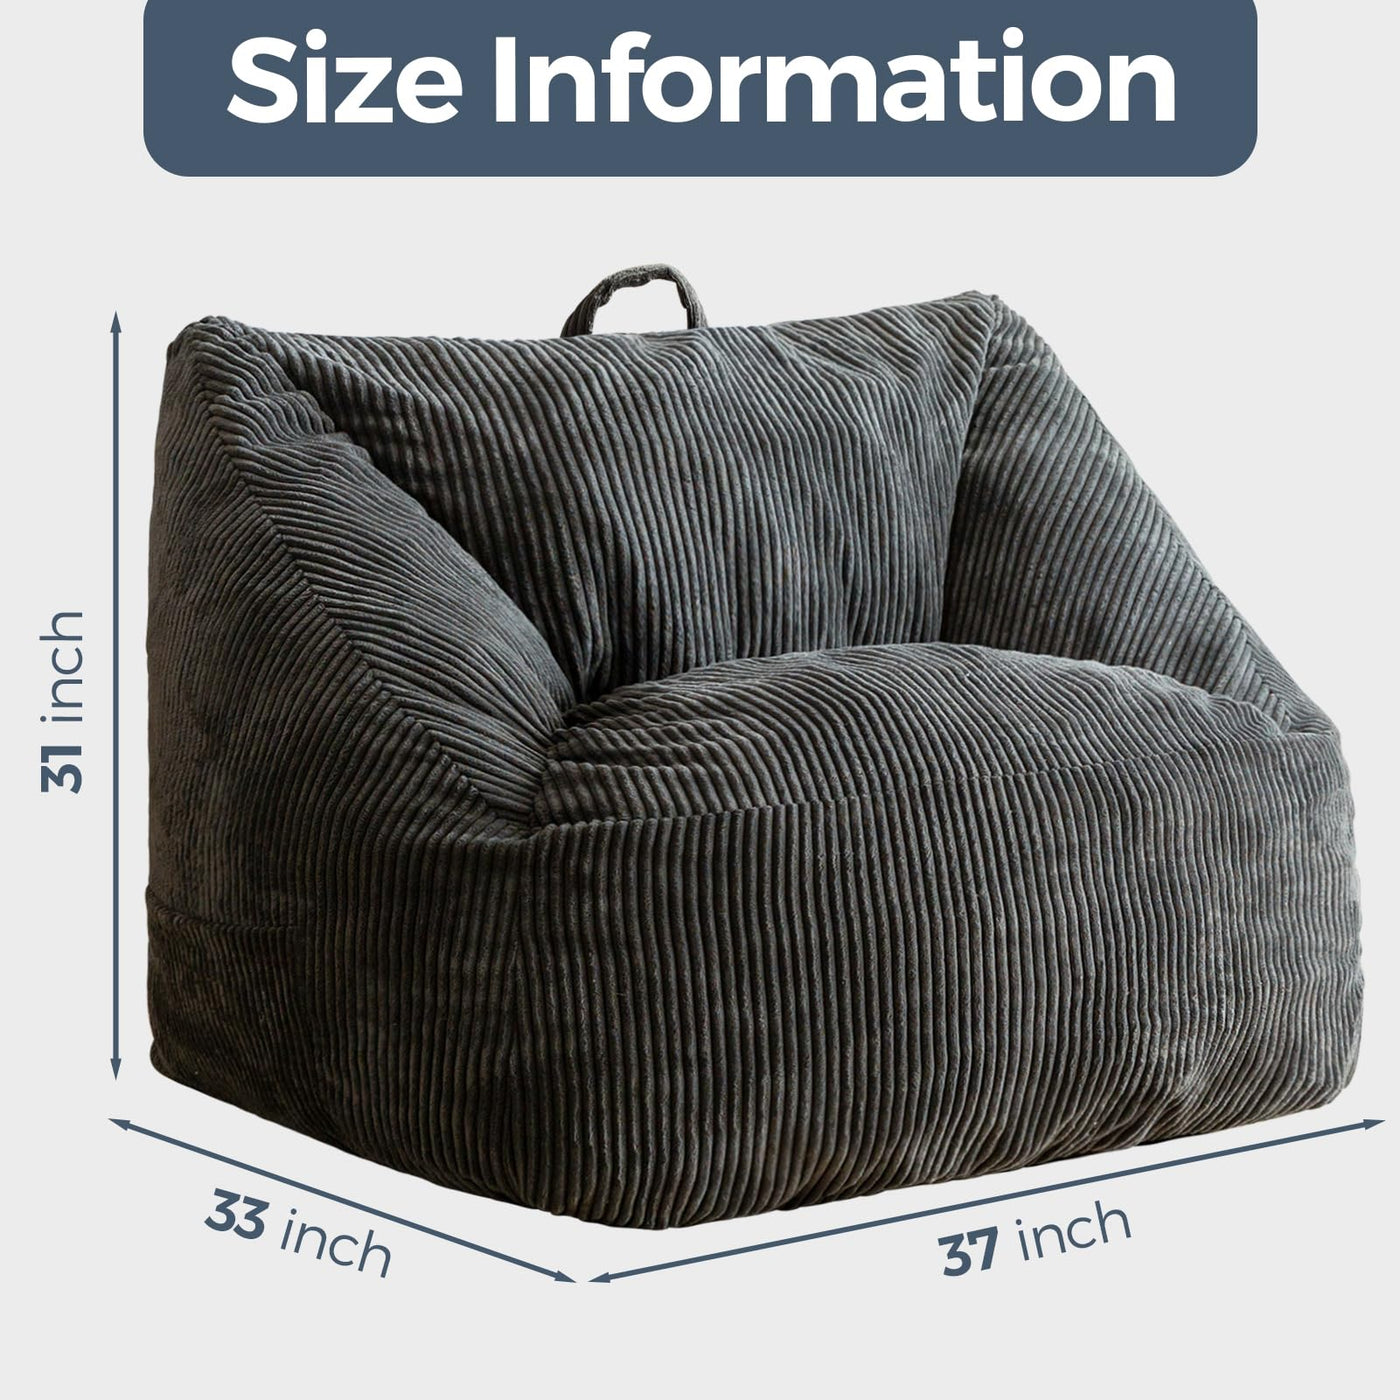 MAXYOYO Bean Bag Chair, Floor Sofa with Handle, Teens Living Room Accent Sofa Chair with Pocket for Gaming Reading Relaxing (Dark Grey)